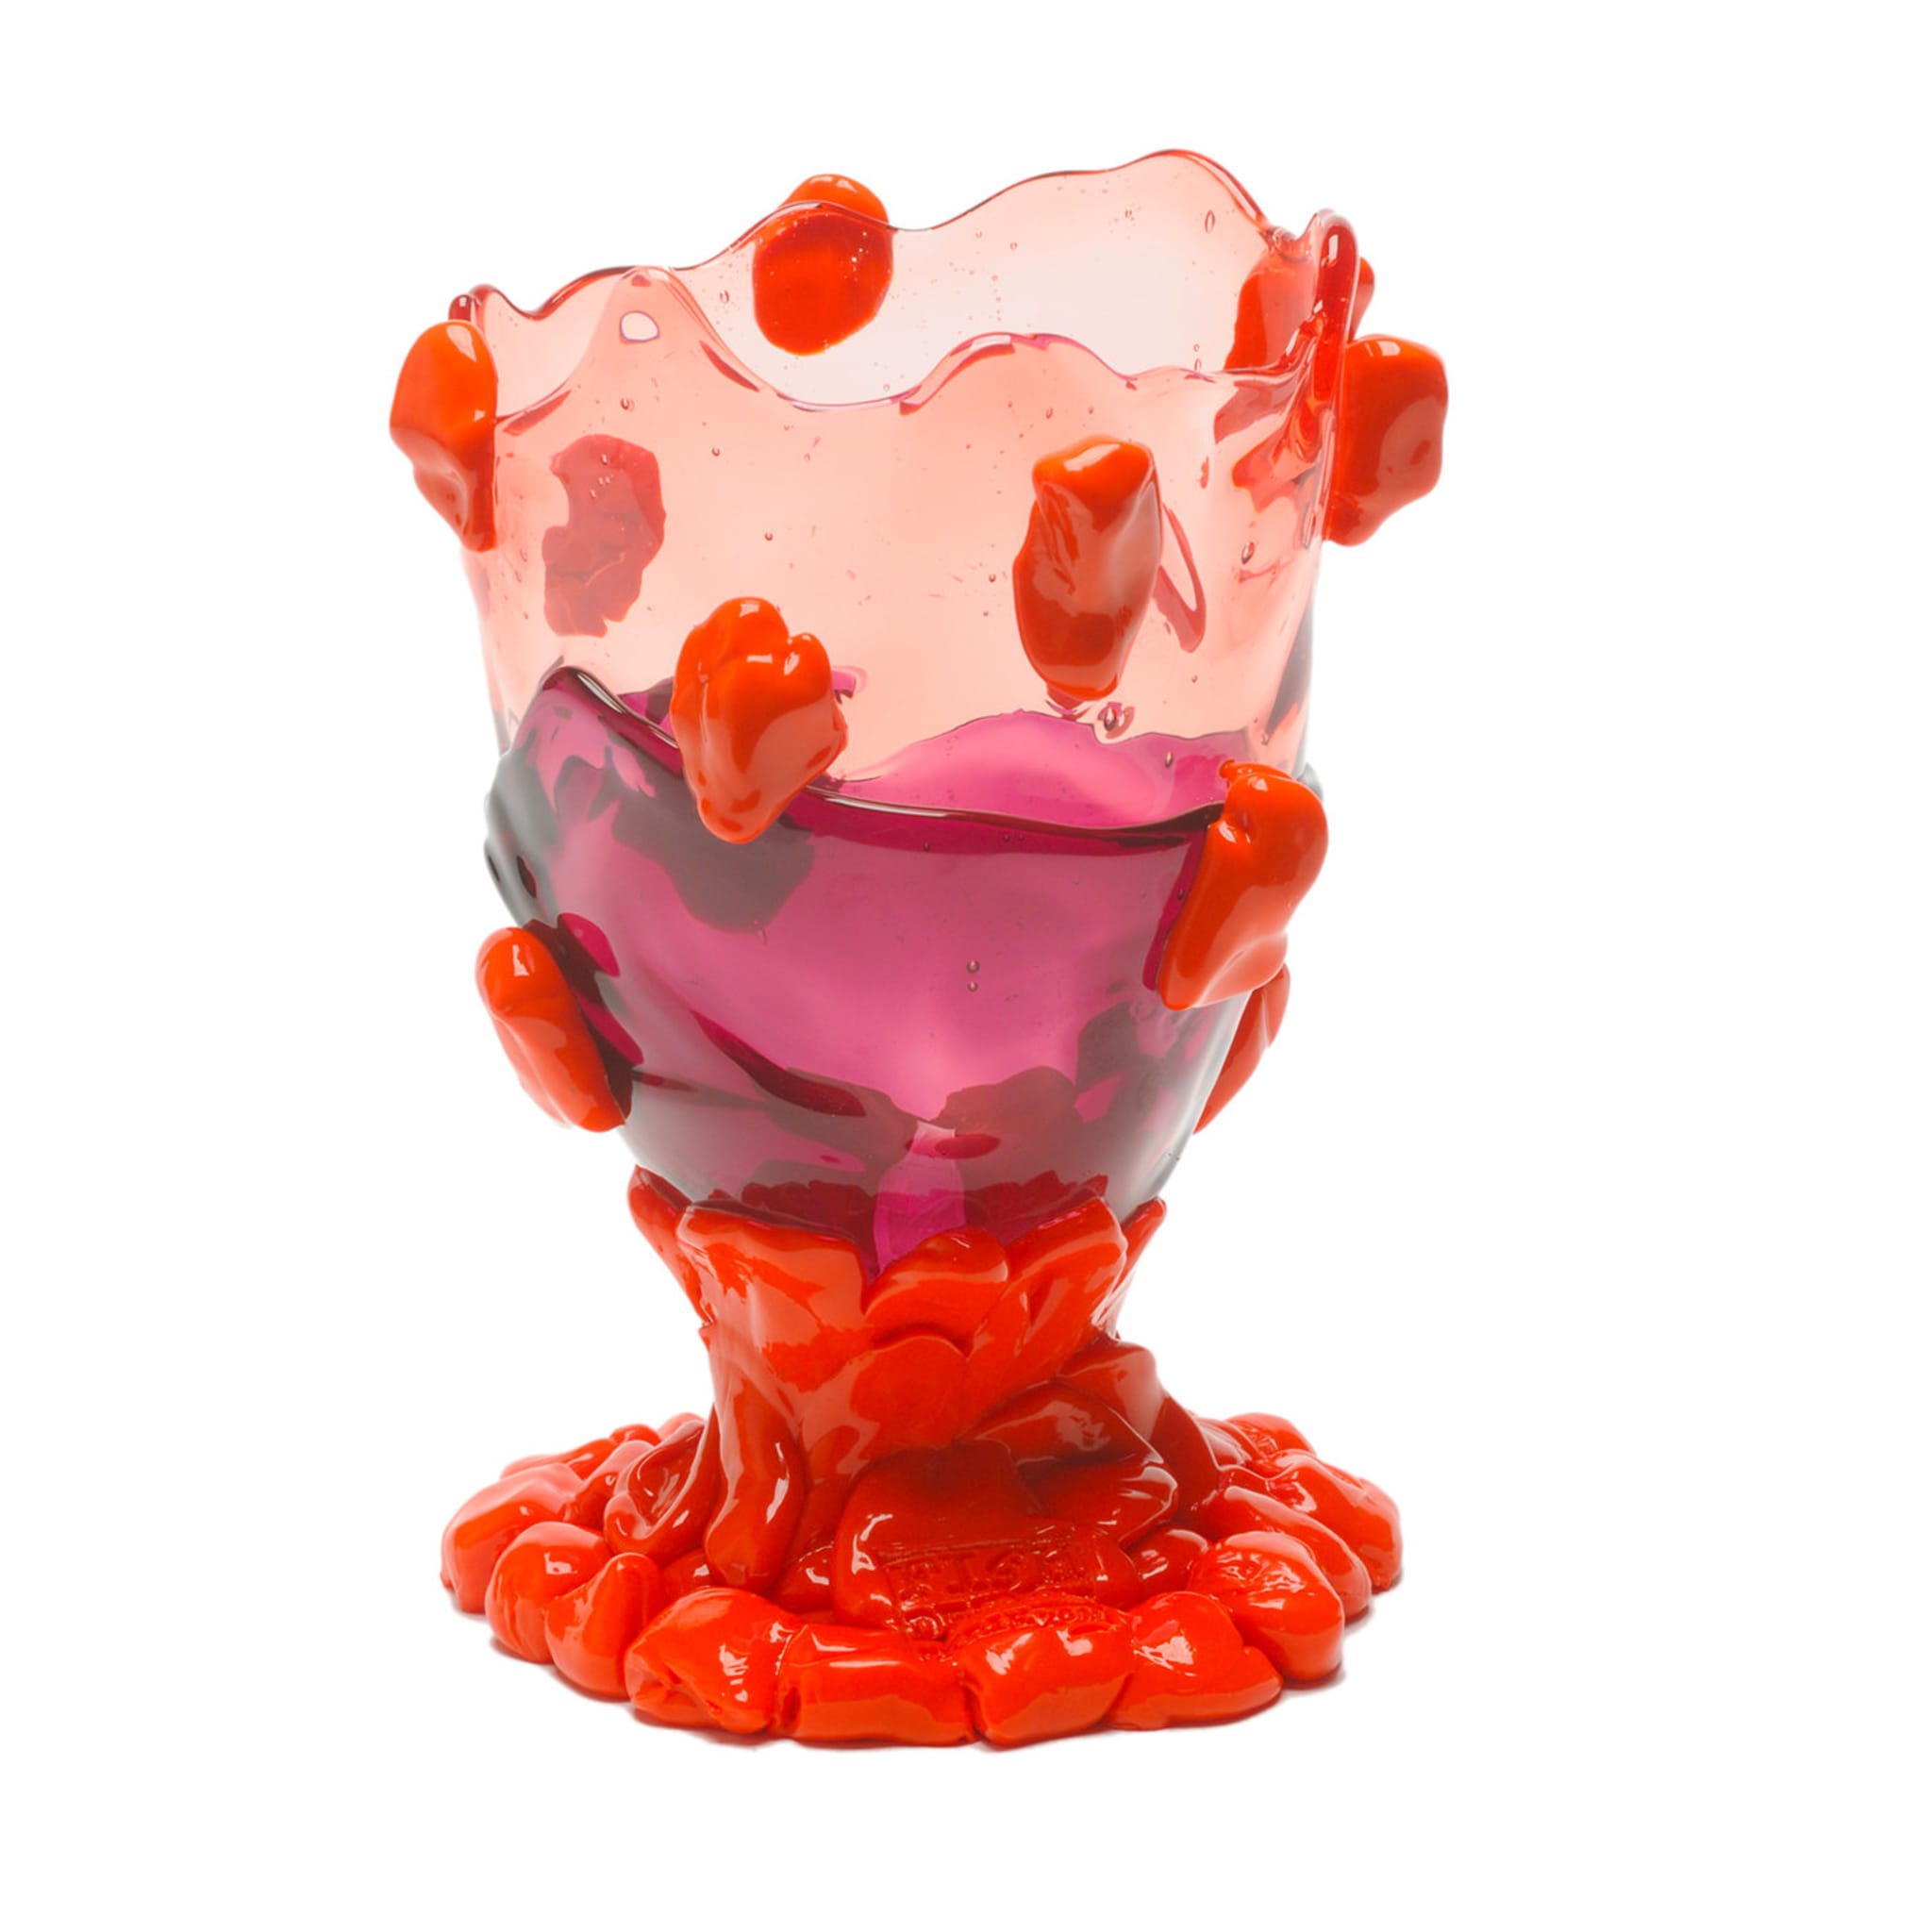 Nugget Extracolor Small Vase By Gaetano Pesce - Alternative view 1